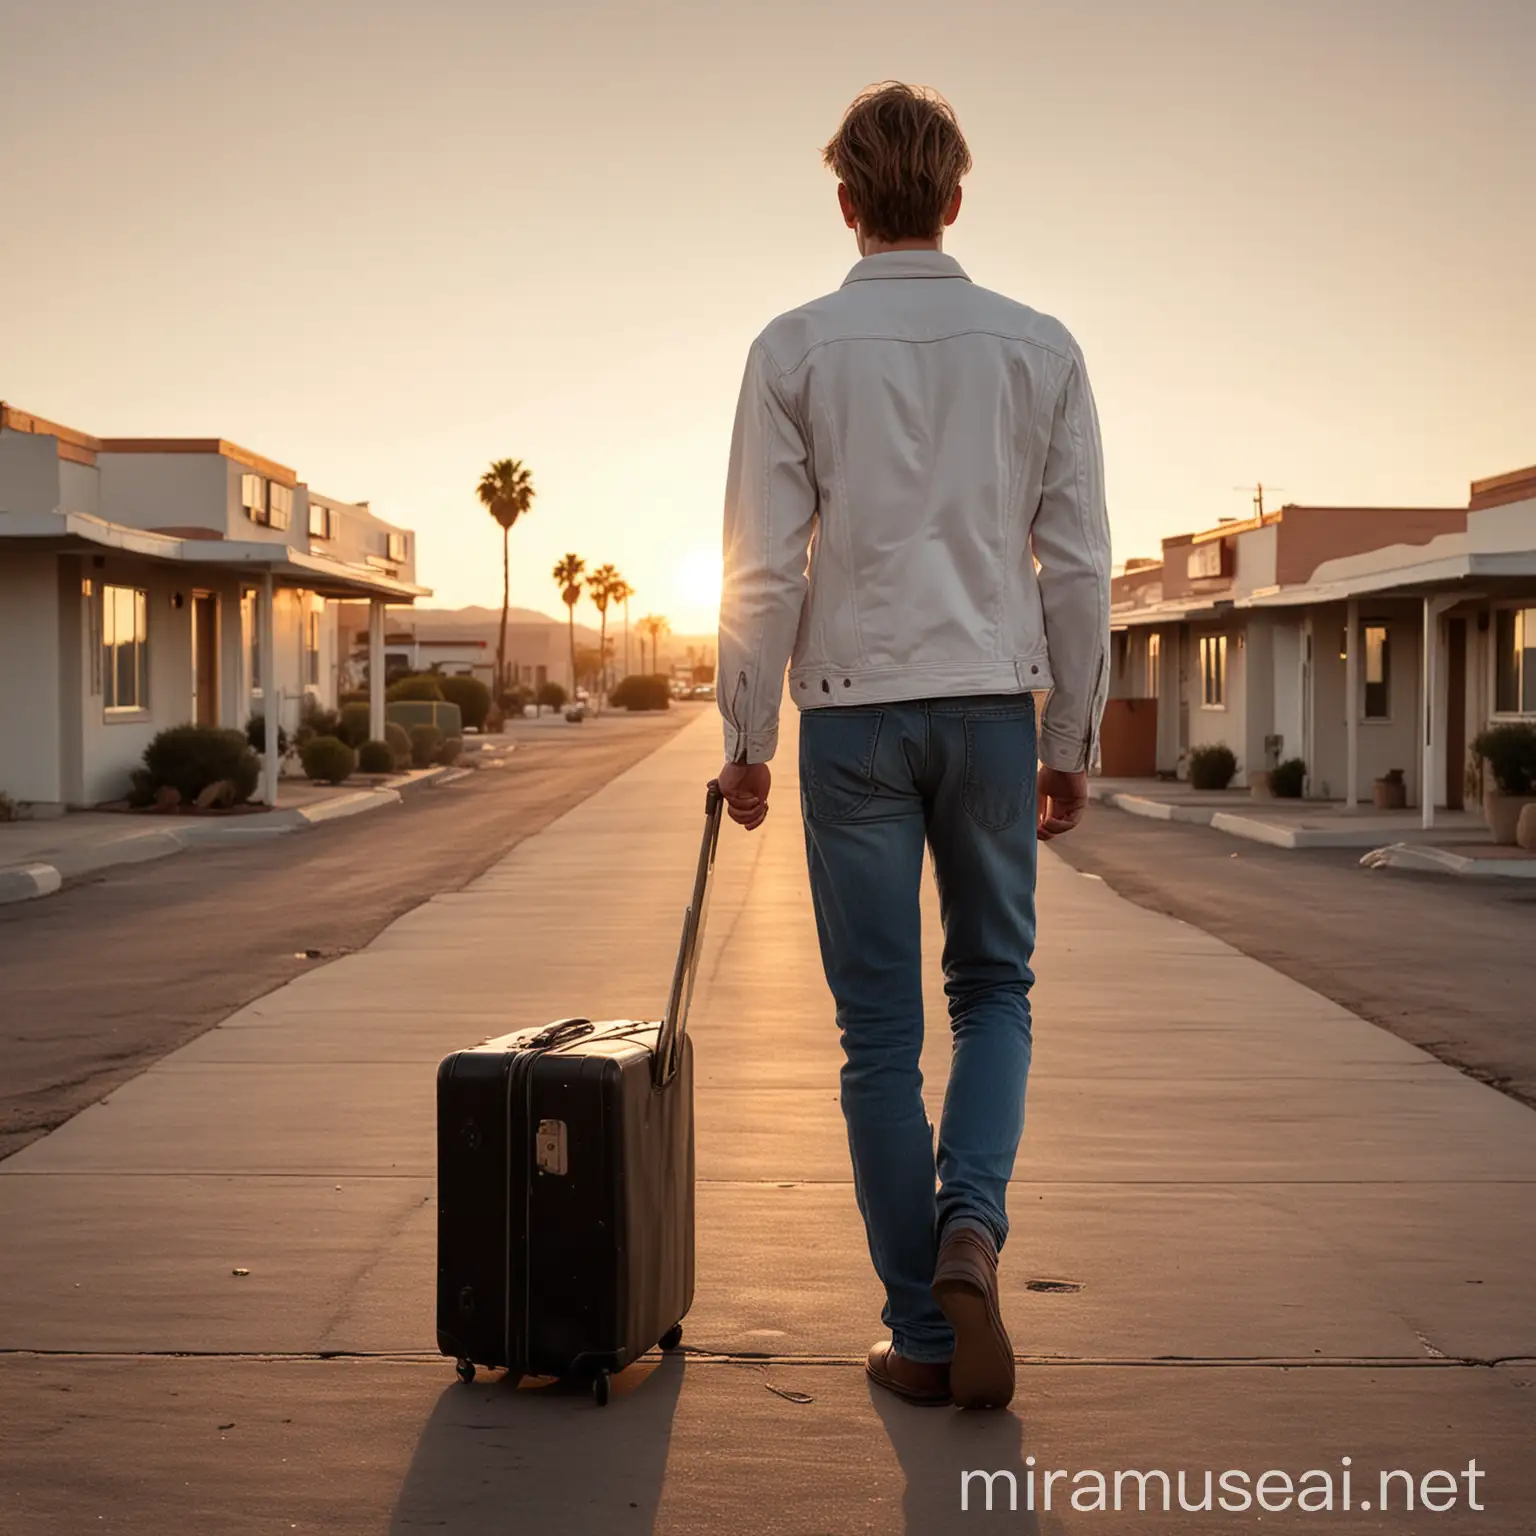 a young tall and thin man, light hair, from behind, wearing jeans and a white shirt. A dark jacket is under his arm and a suitcase is on the ground. The man is in front of motel in the californian desert at sunset, in a vintage atmosphere. The view is slightly from the bottom